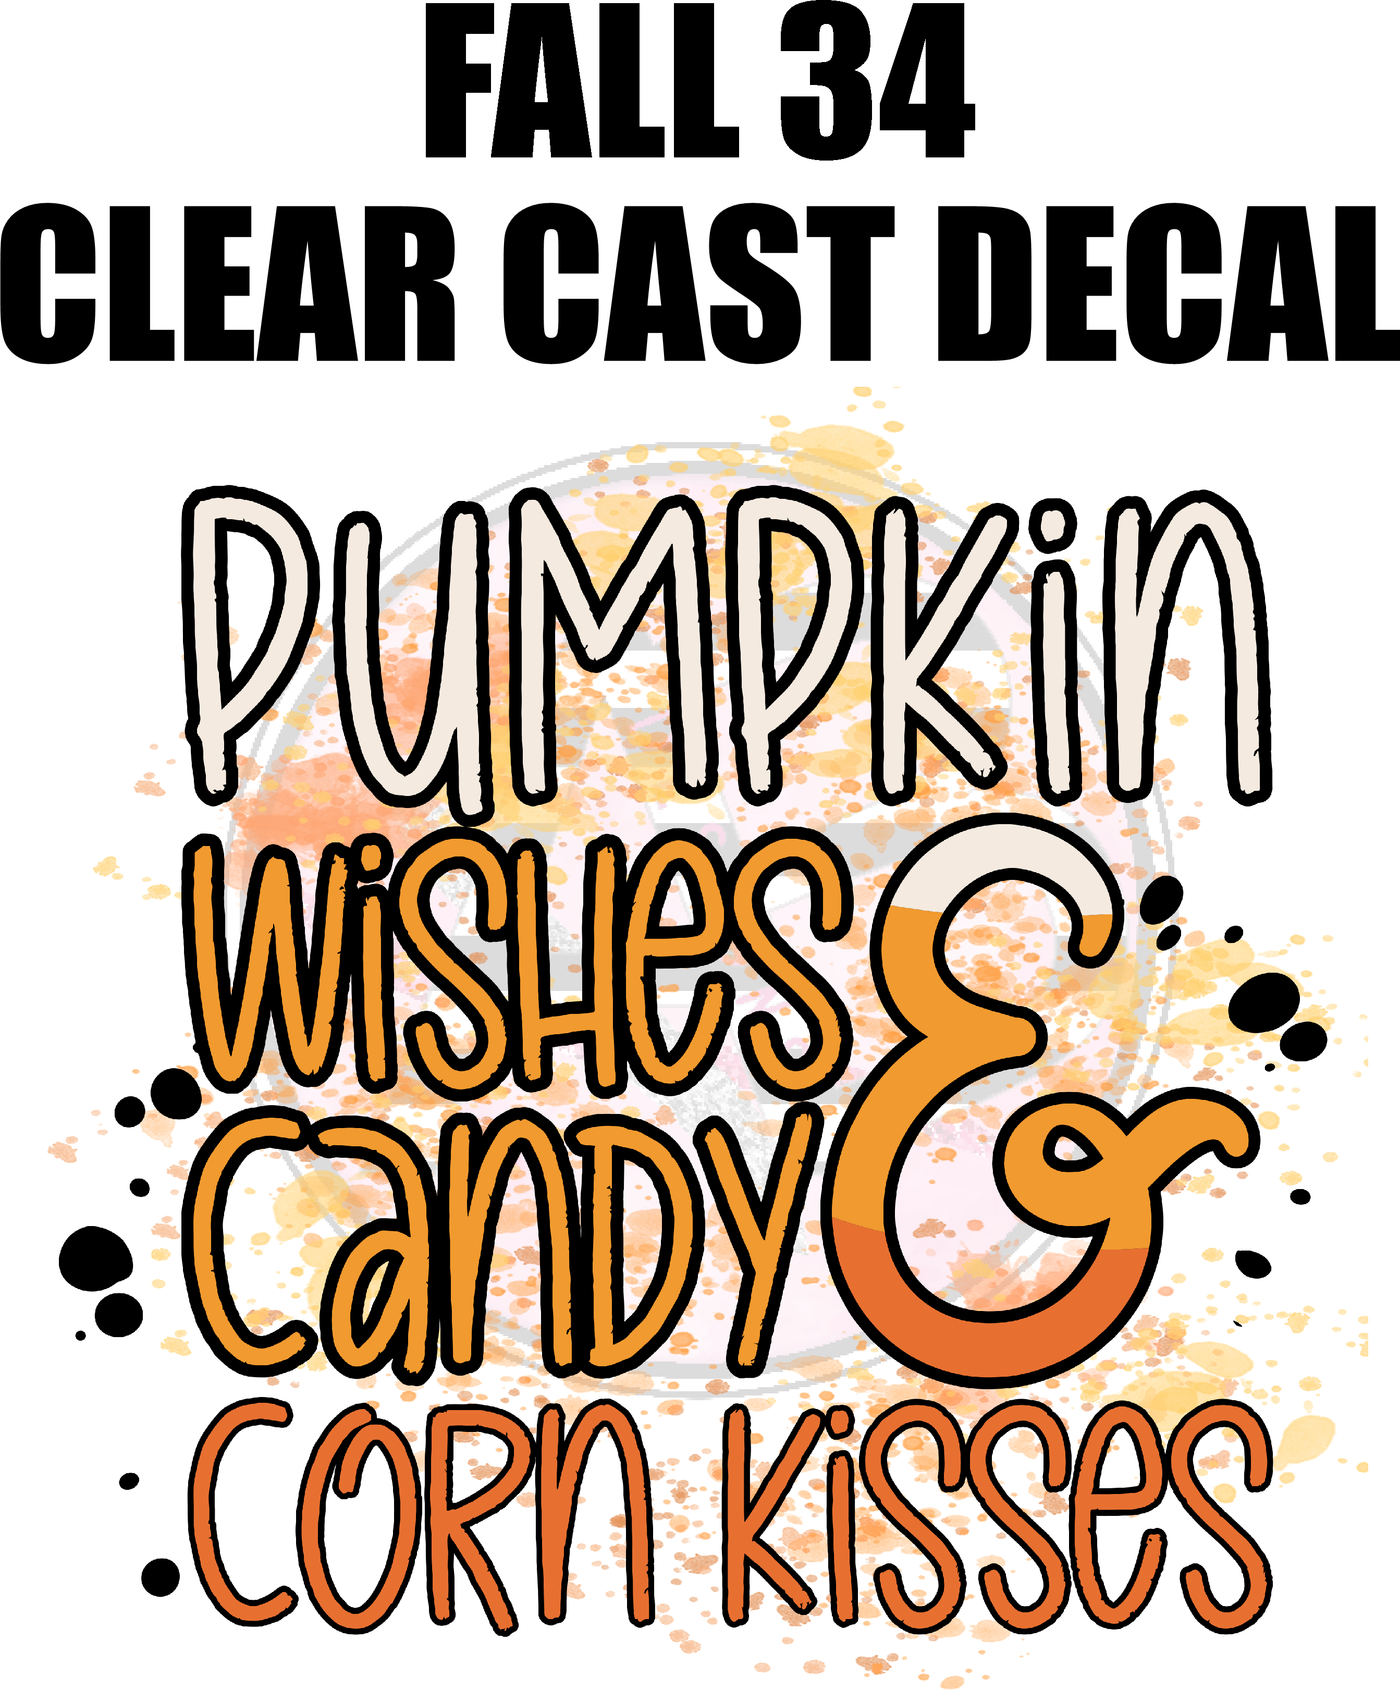 Fall 34 - Clear Cast Decal